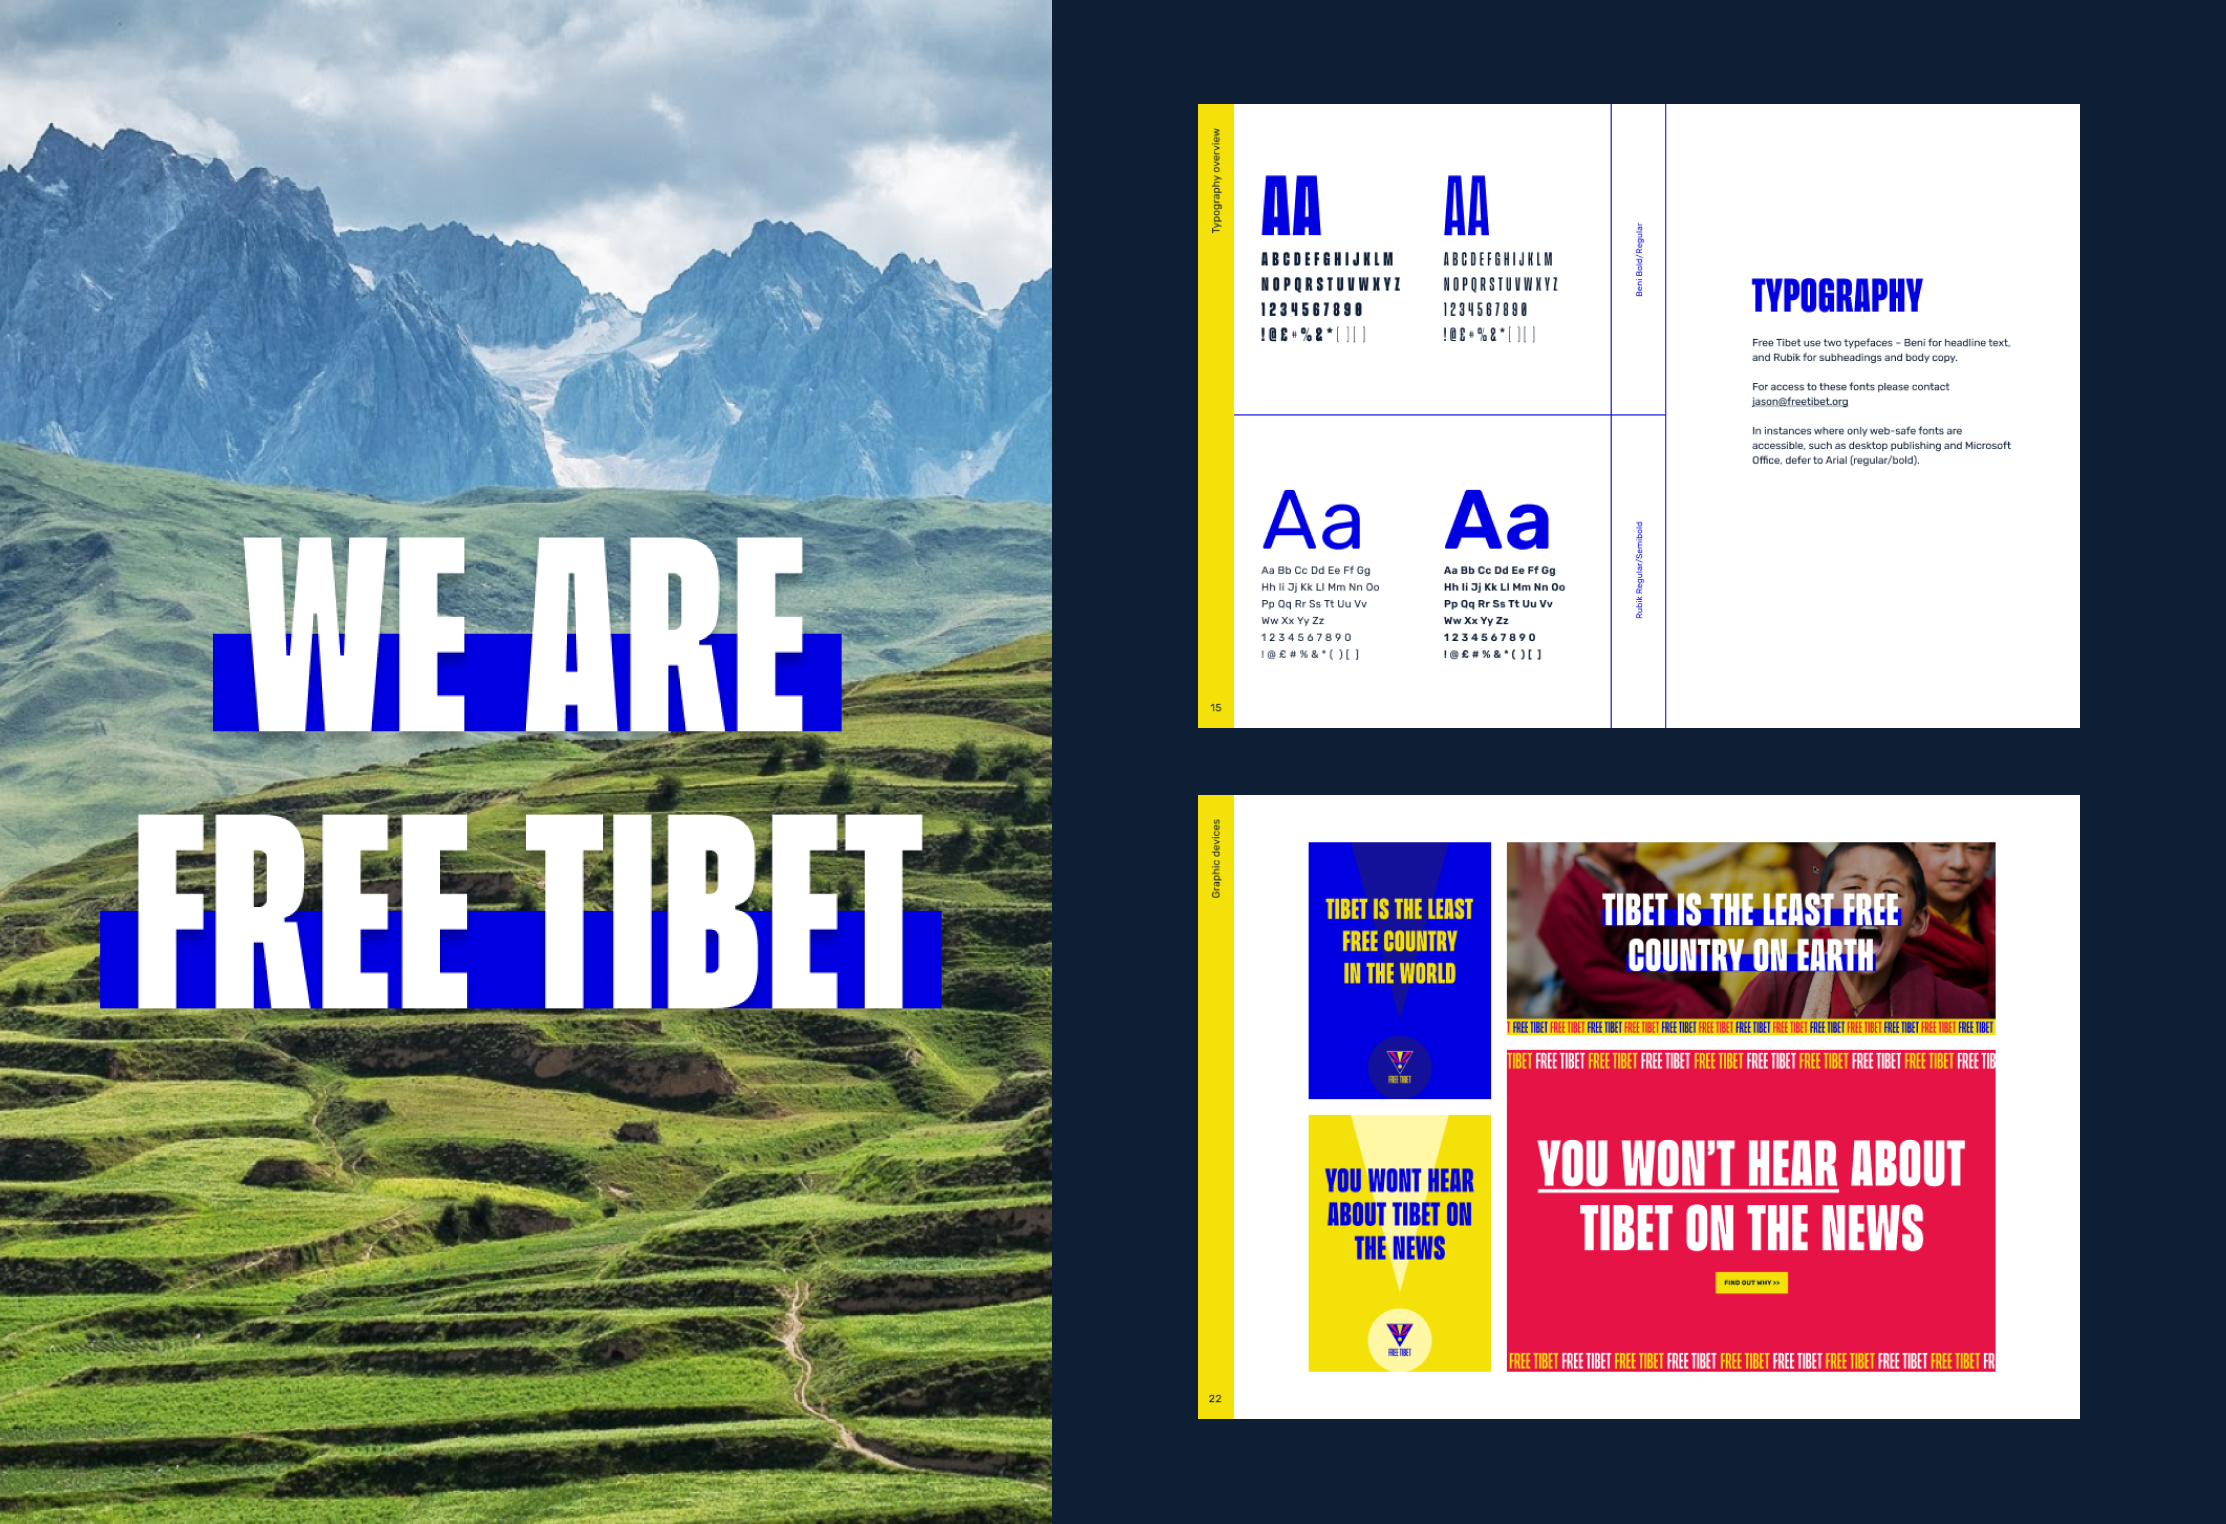 New brand guidelines for Free Tibet